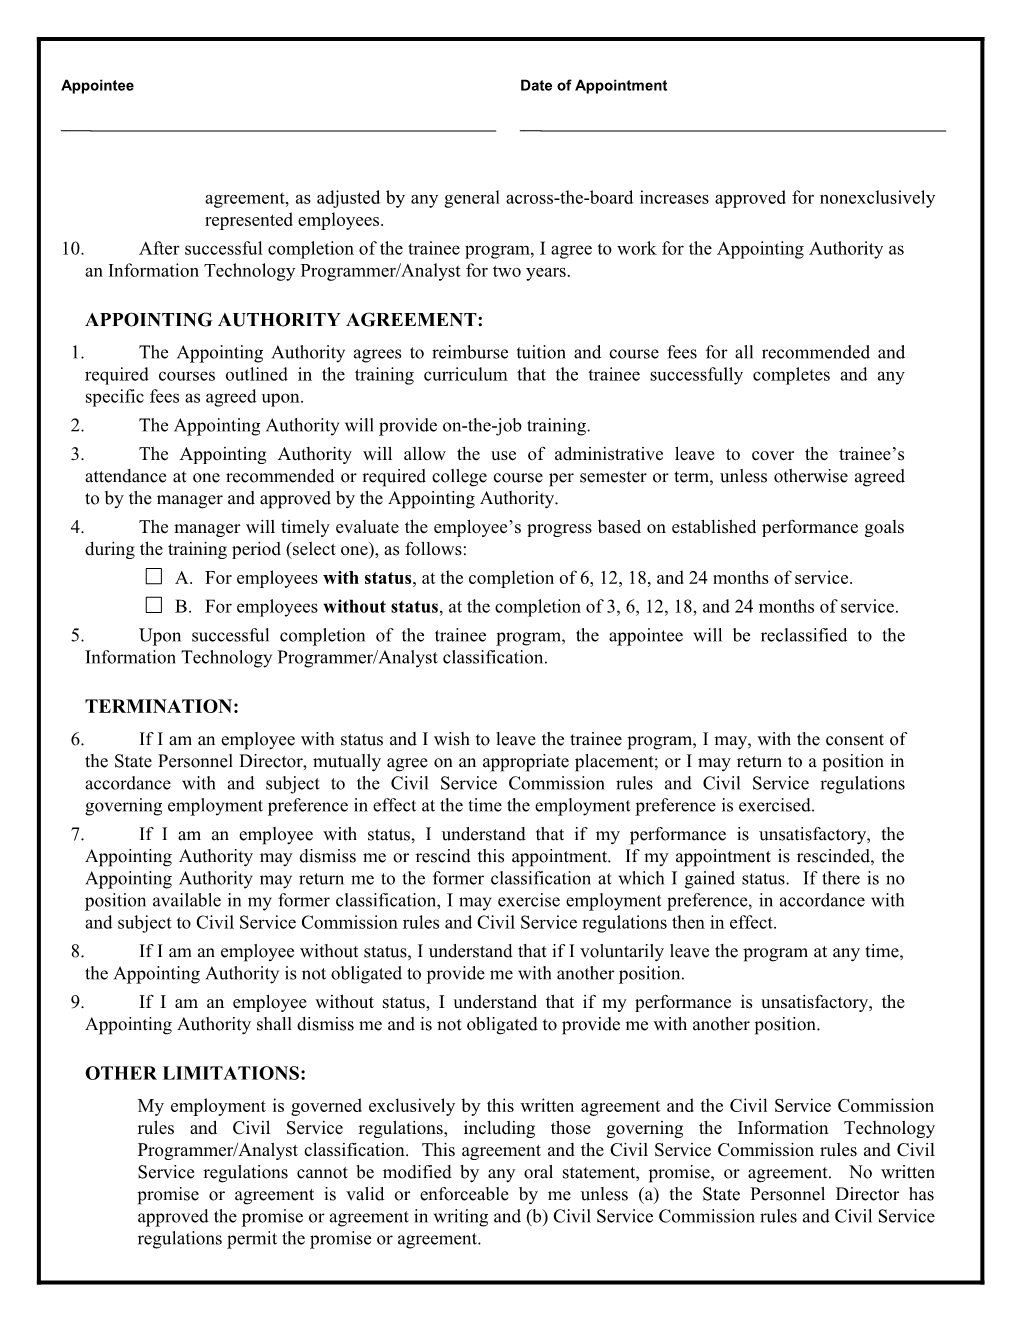 CS-1755 Appointment Agreement